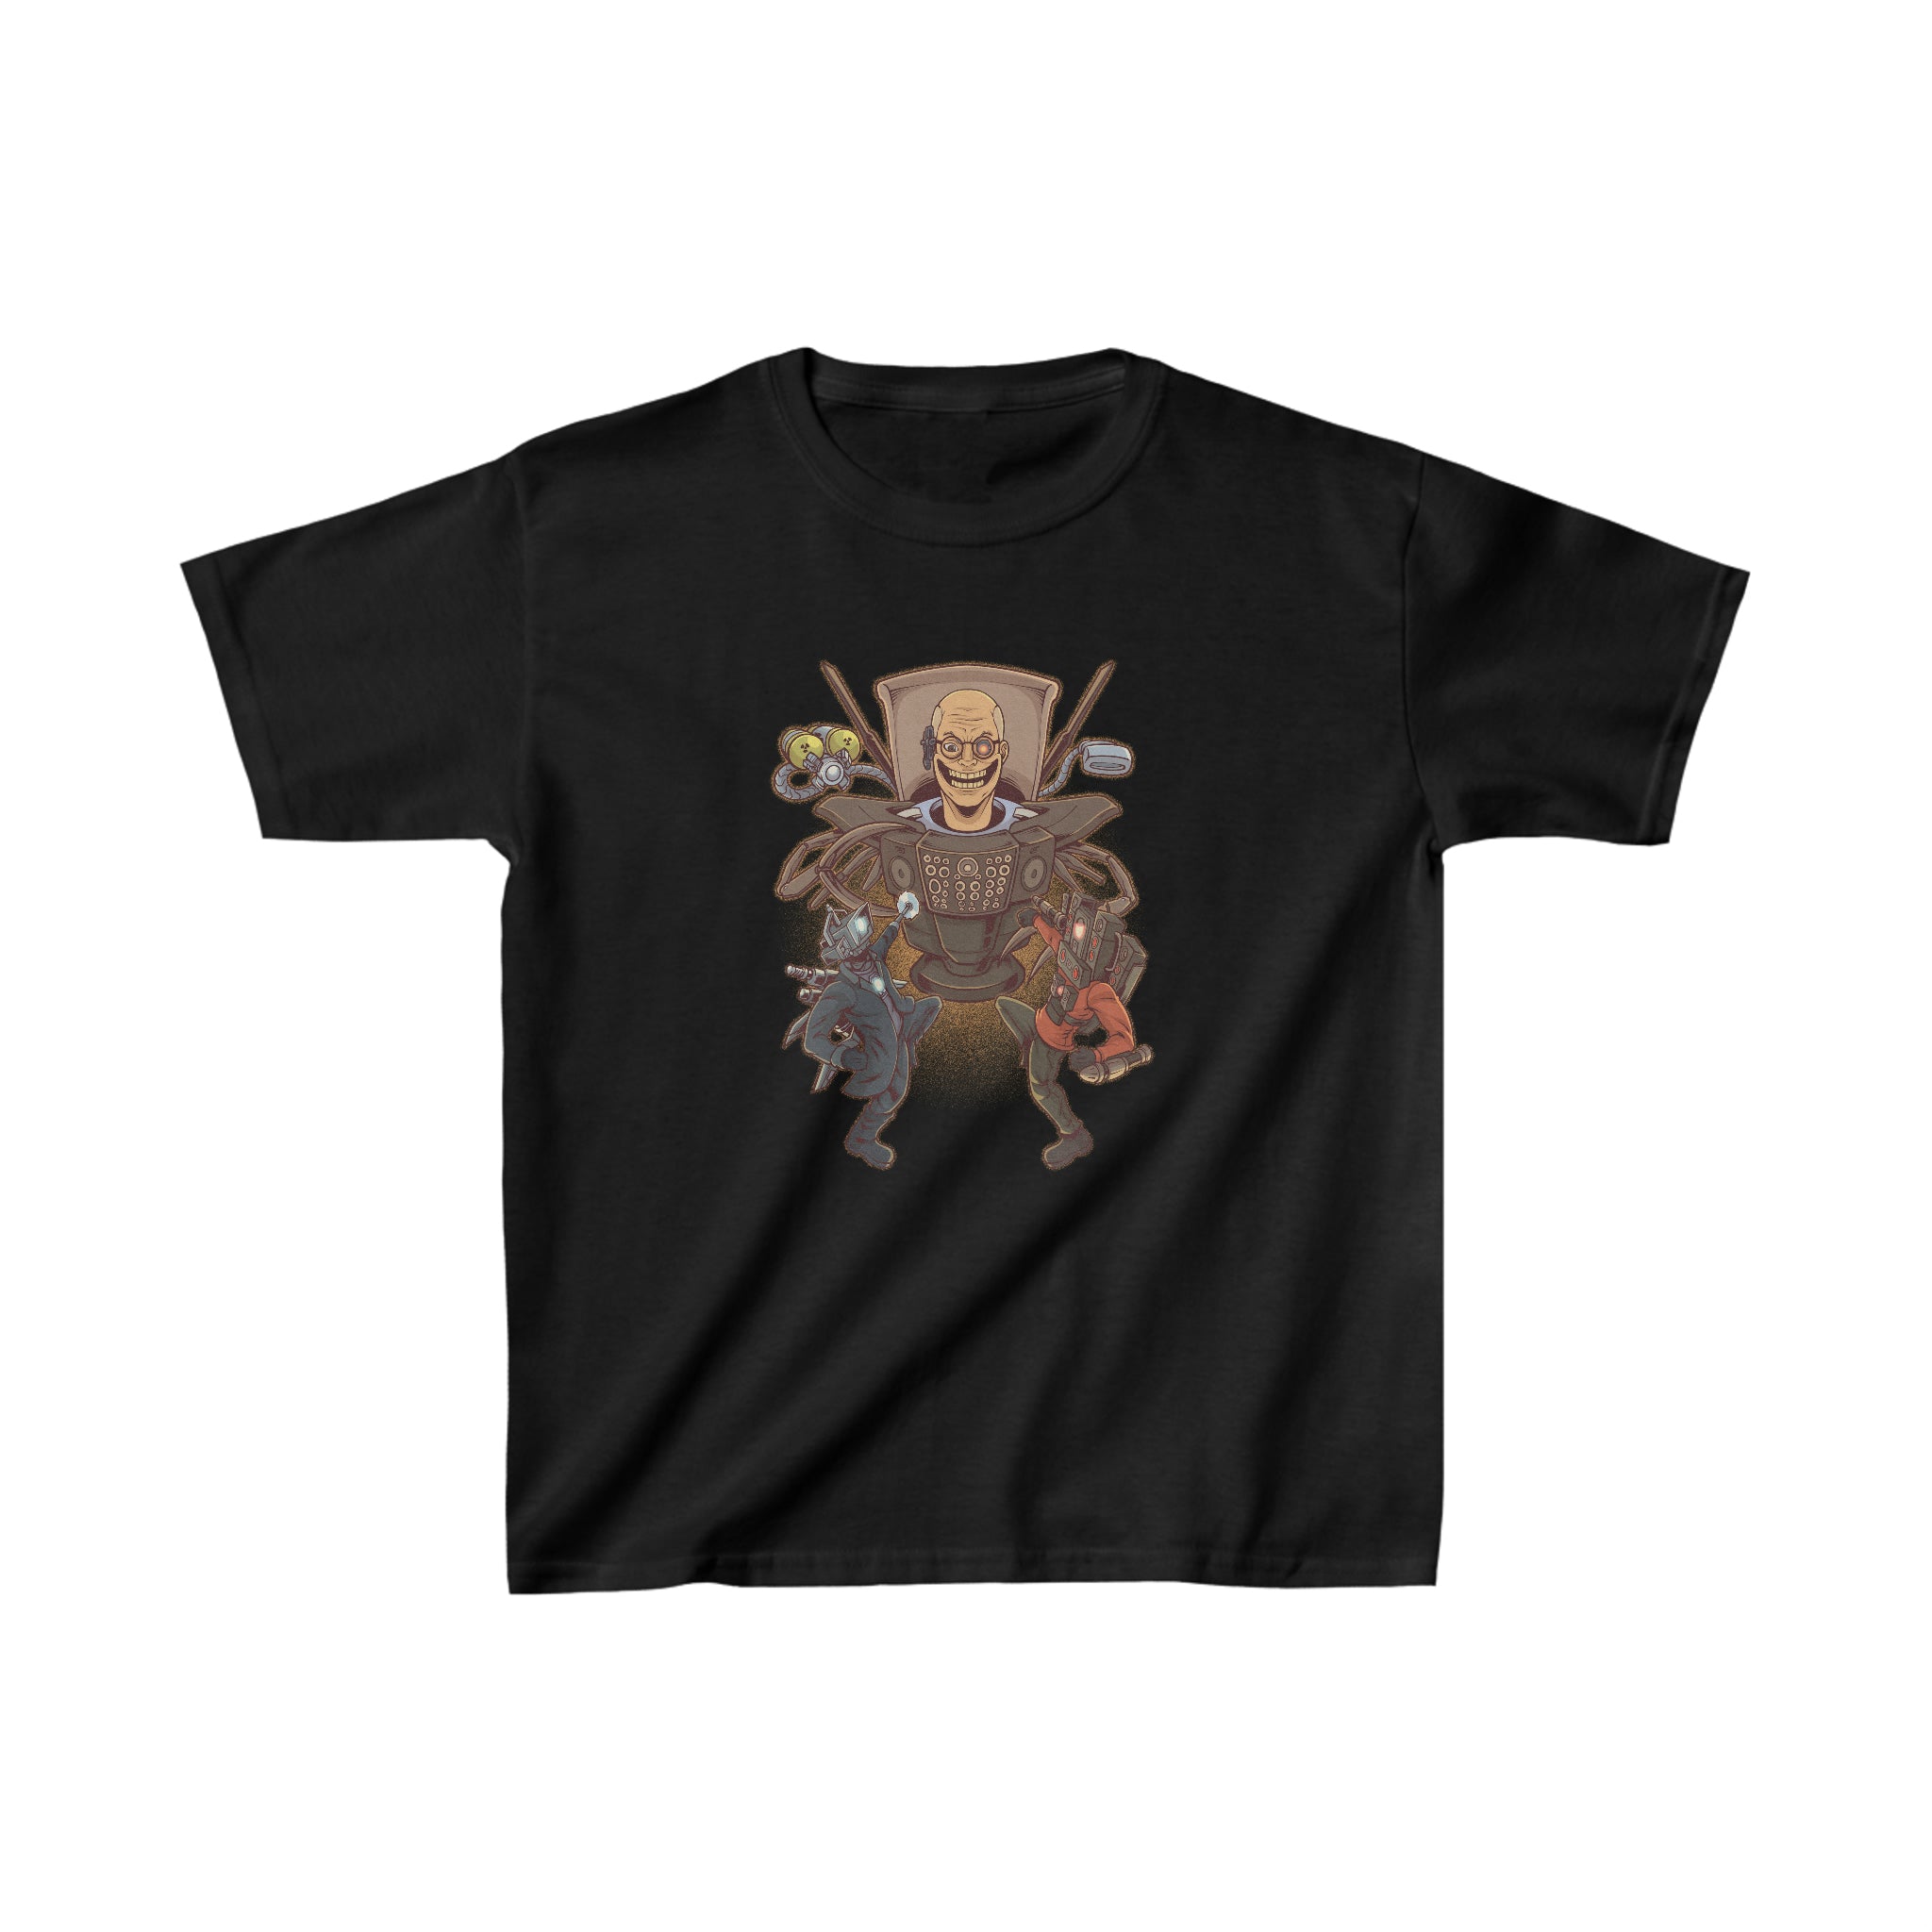 Frontlines Tee - Youth